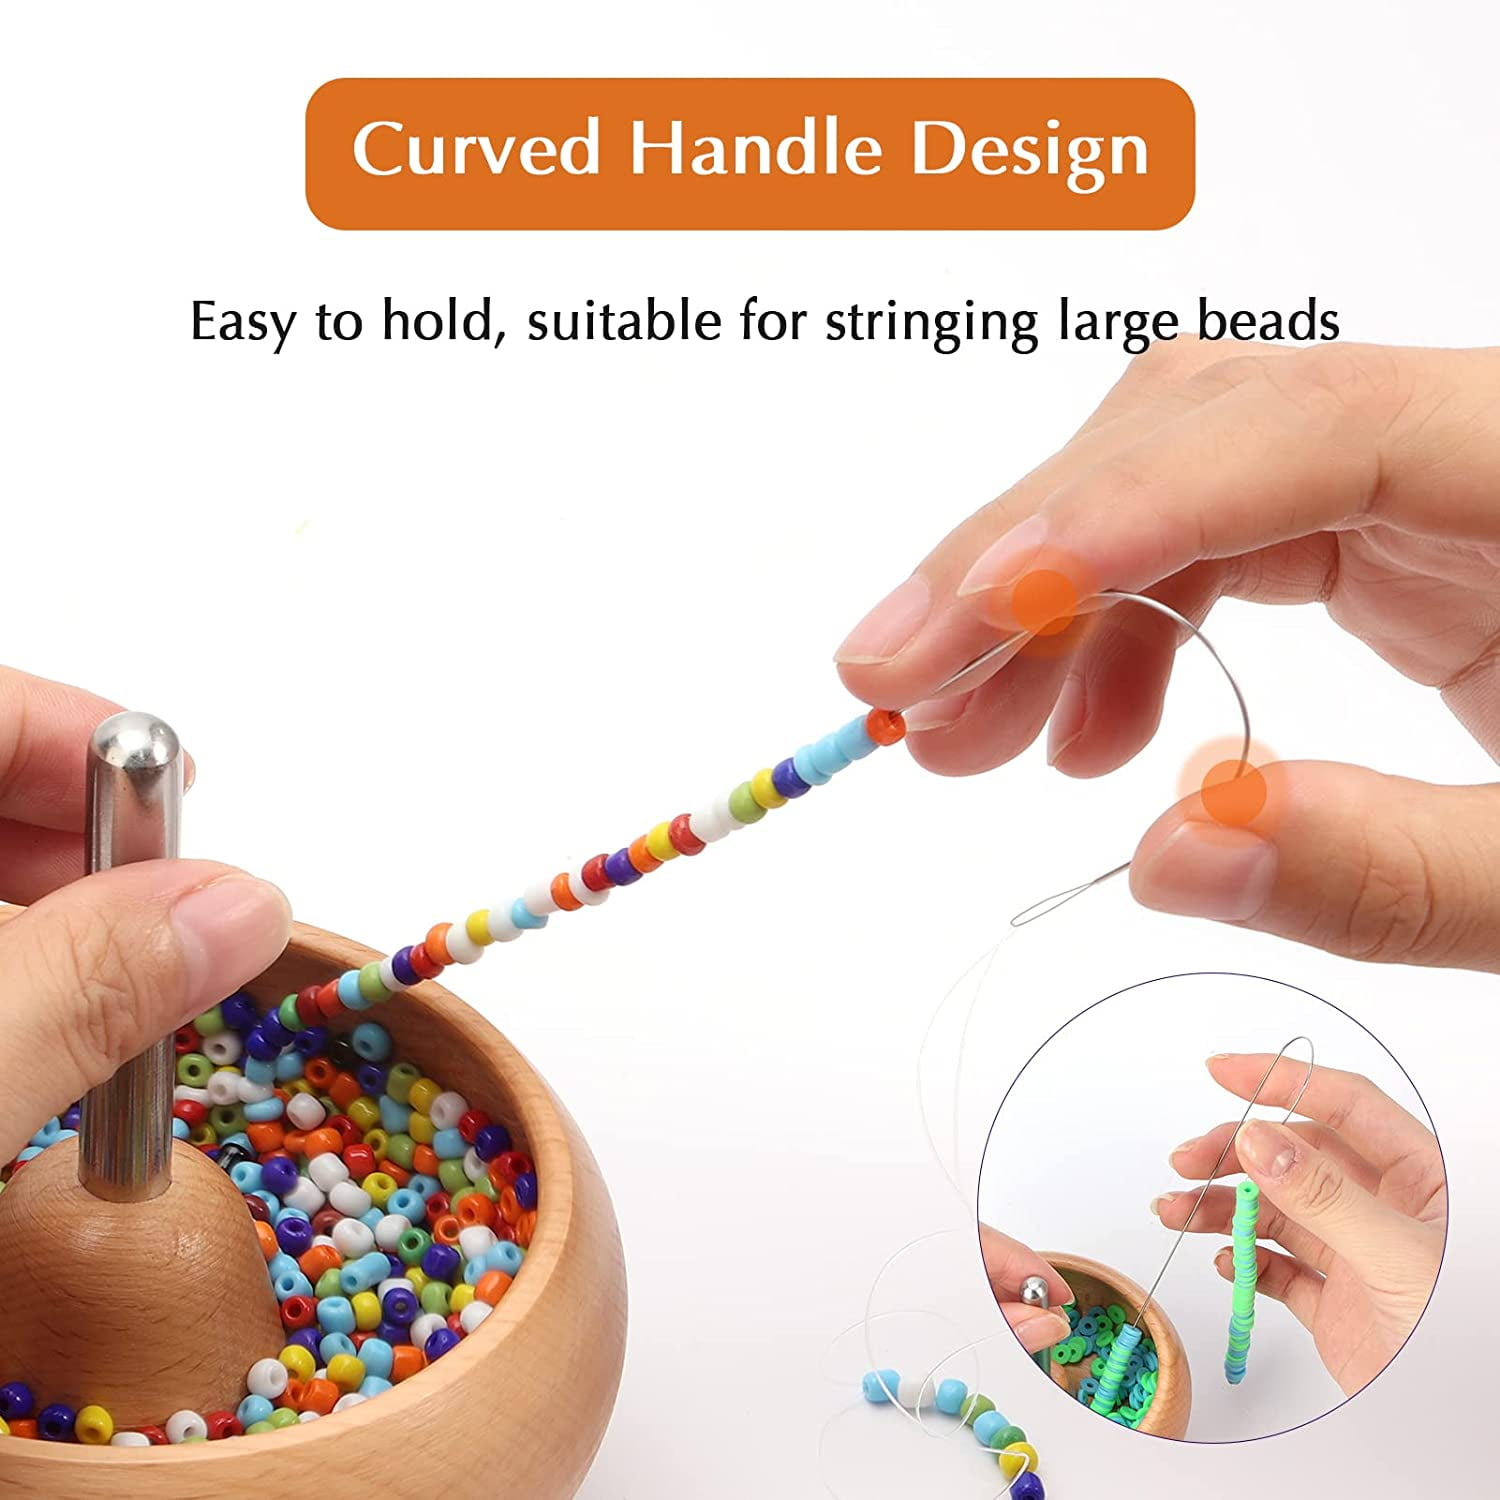  Big Eye Curved Beading Needles, BENBO 8PCS Stainless Curved  Beading Needles with Handle Loader String Bead Needles Large Eye Curved  Bead Spinner Needles for String Seed Beads Jewelry Making, 2 Styles 